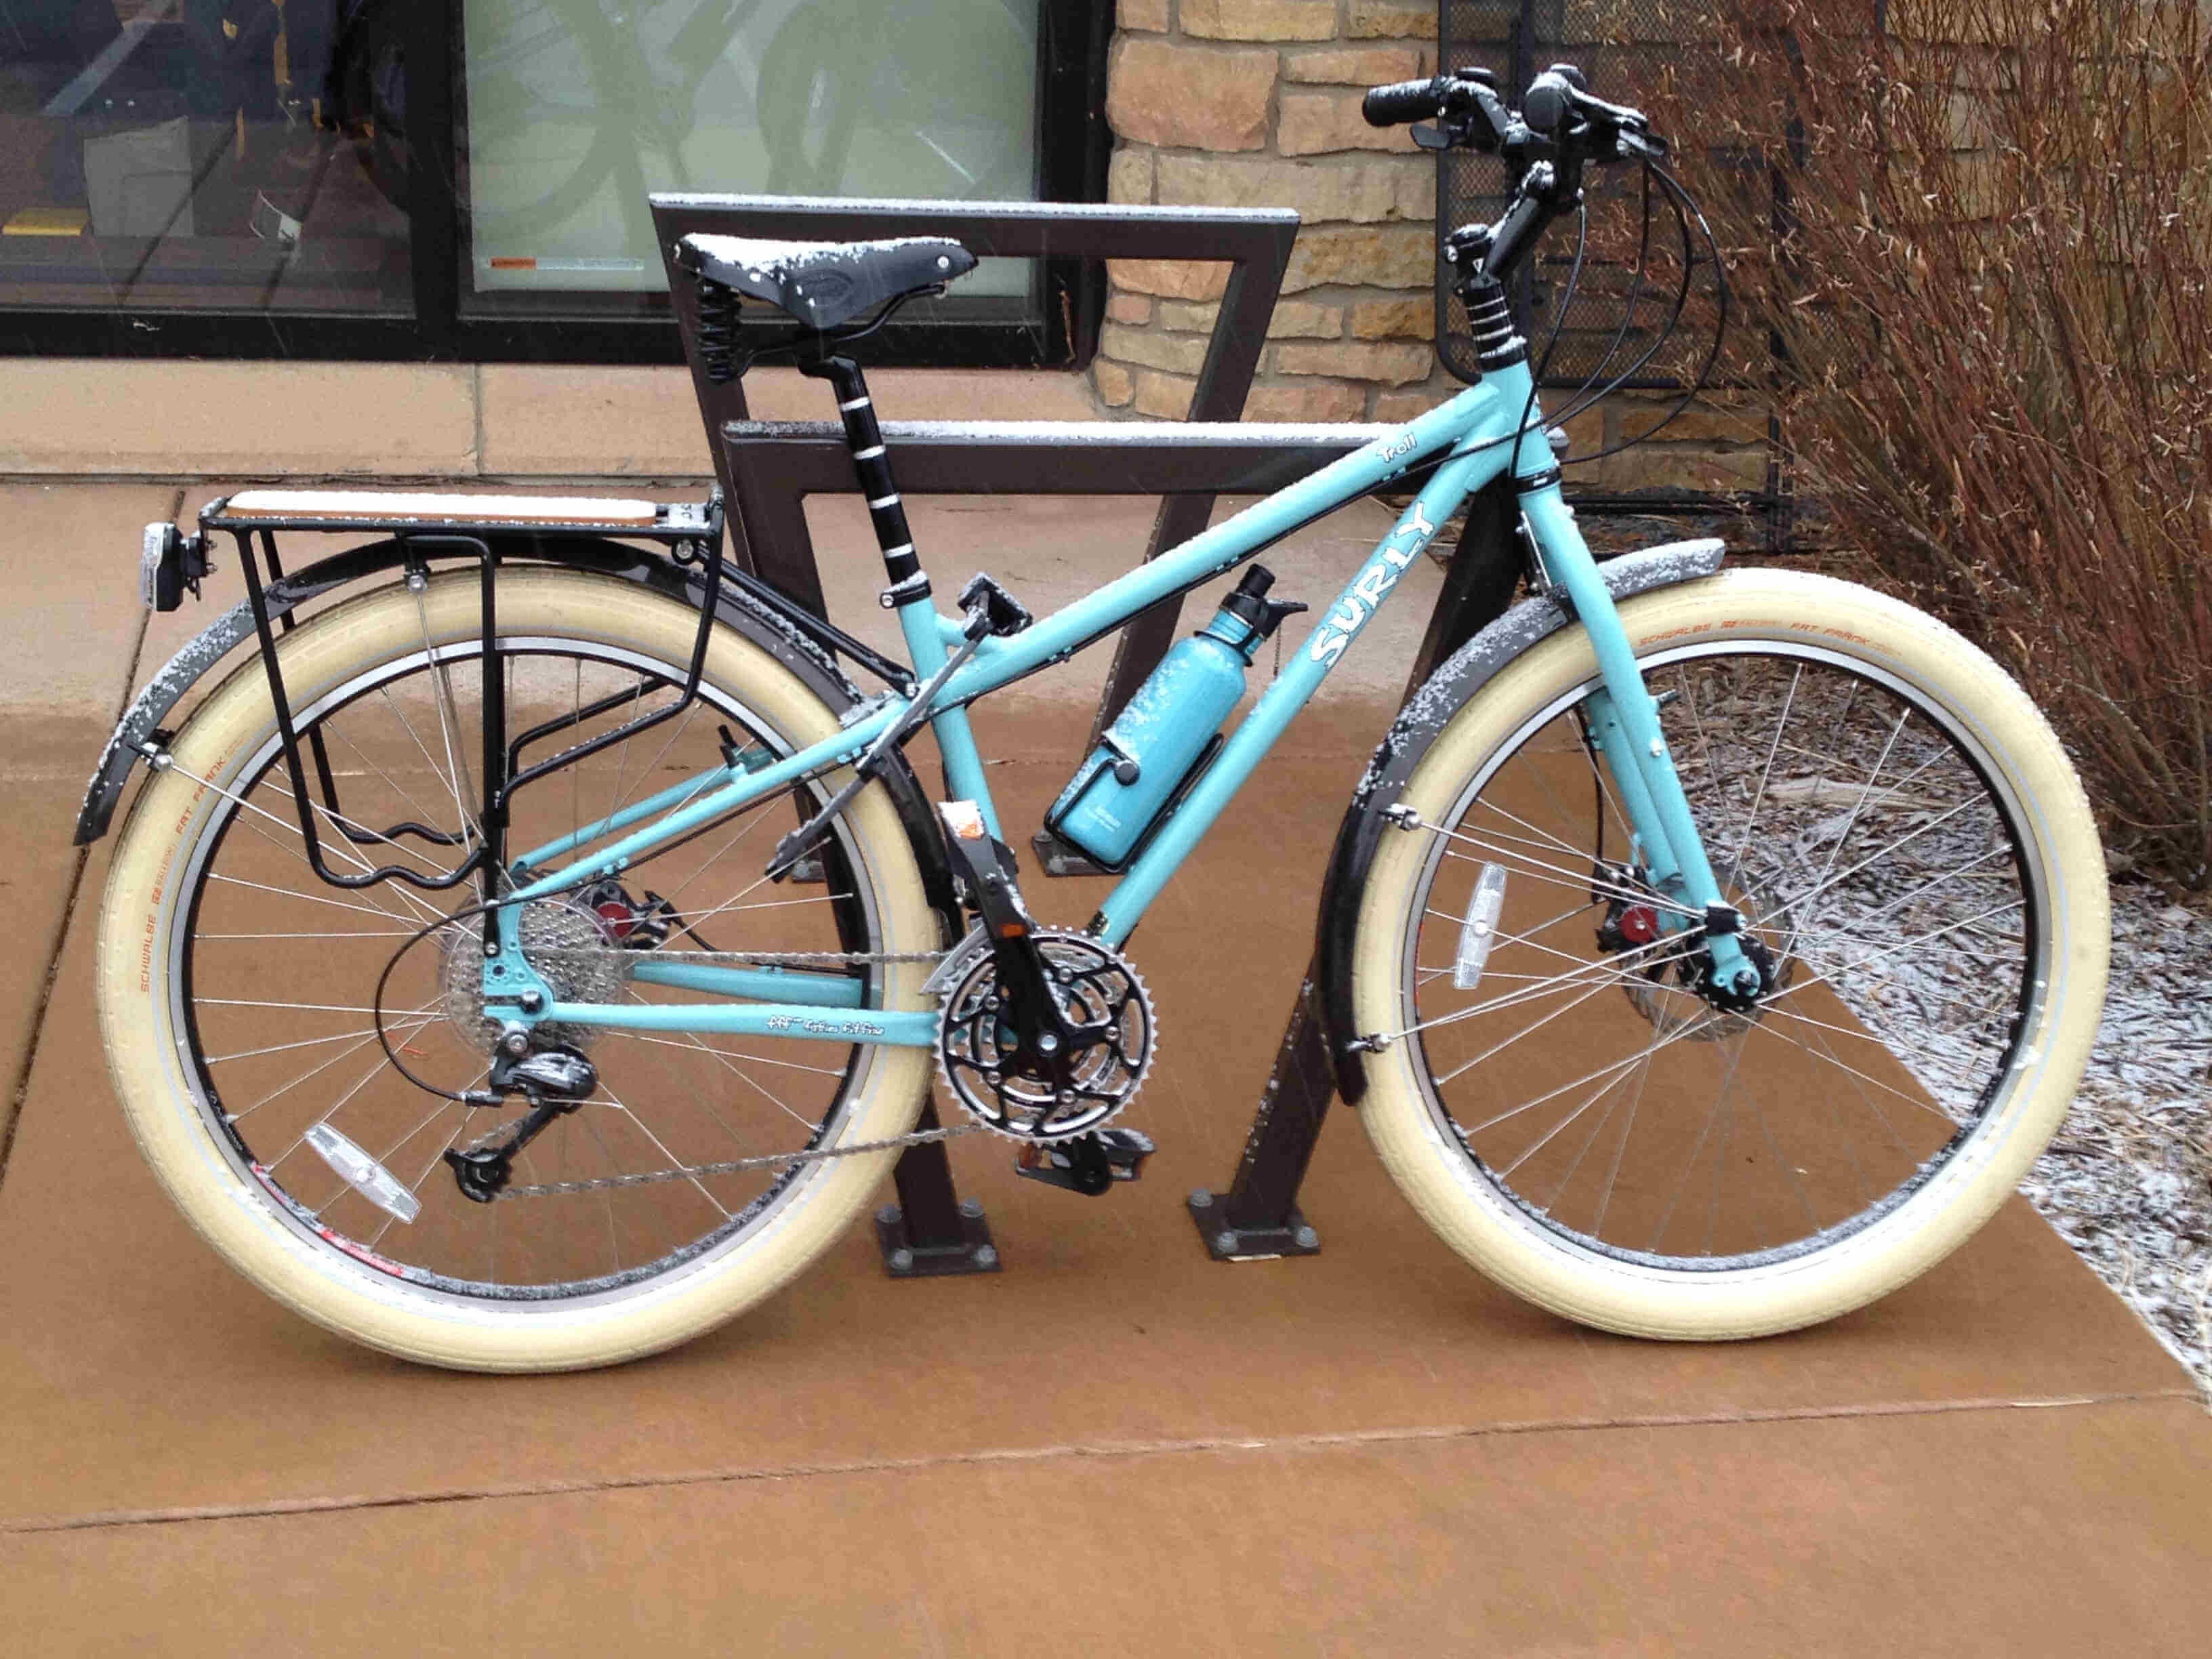 Right side view of a mint Surly Troll bike with white tires, leaning against a bike rack on a sidewalk